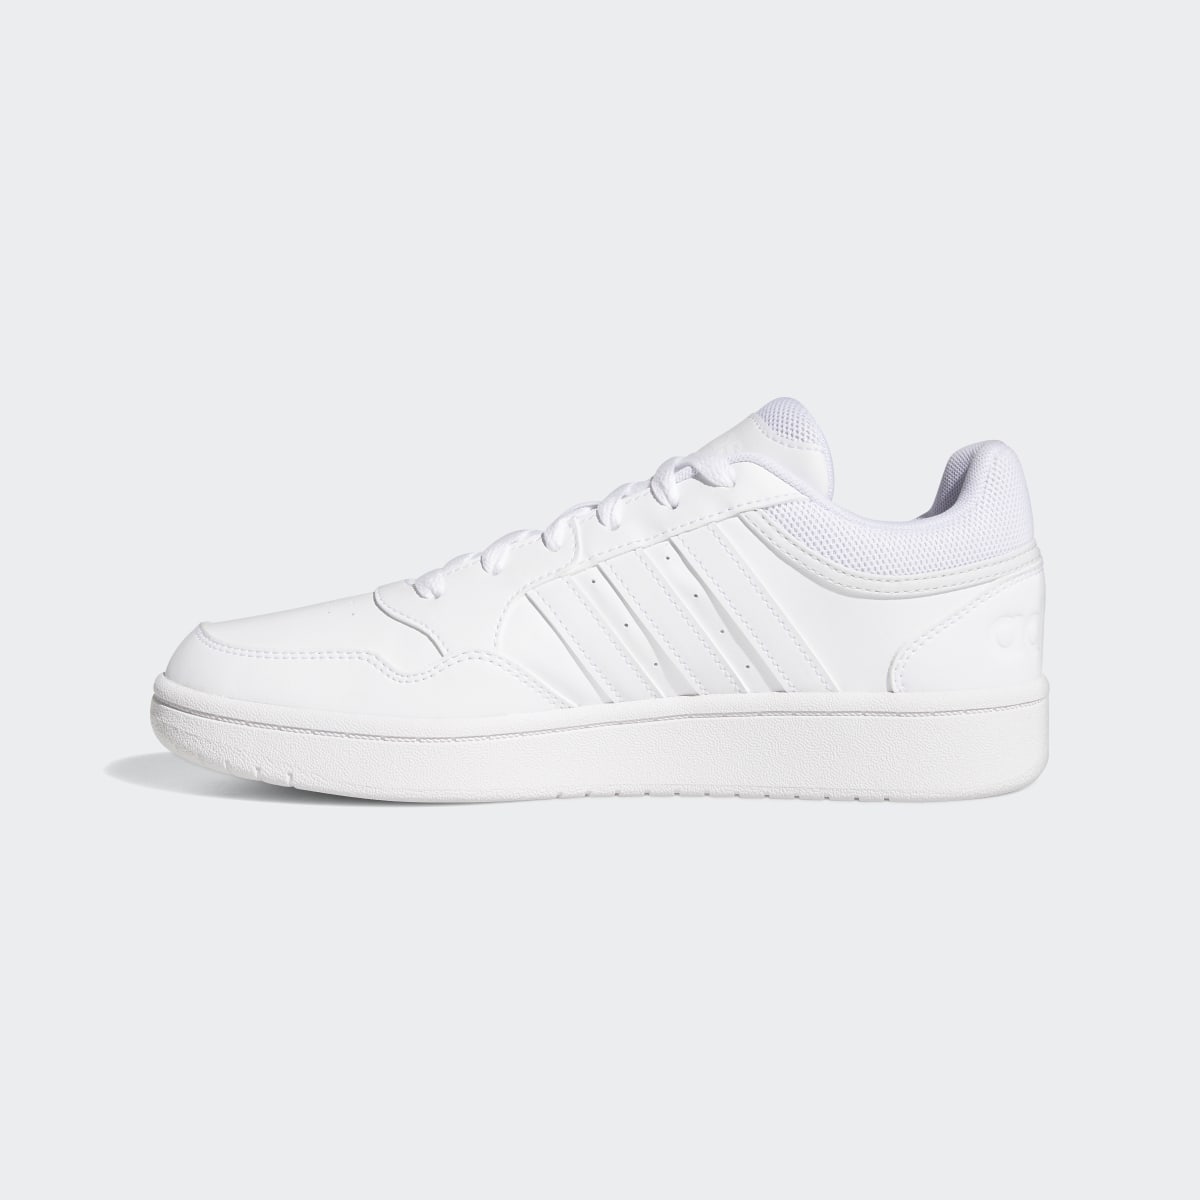 Adidas Hoops 3.0 Low Classic Shoes. 9